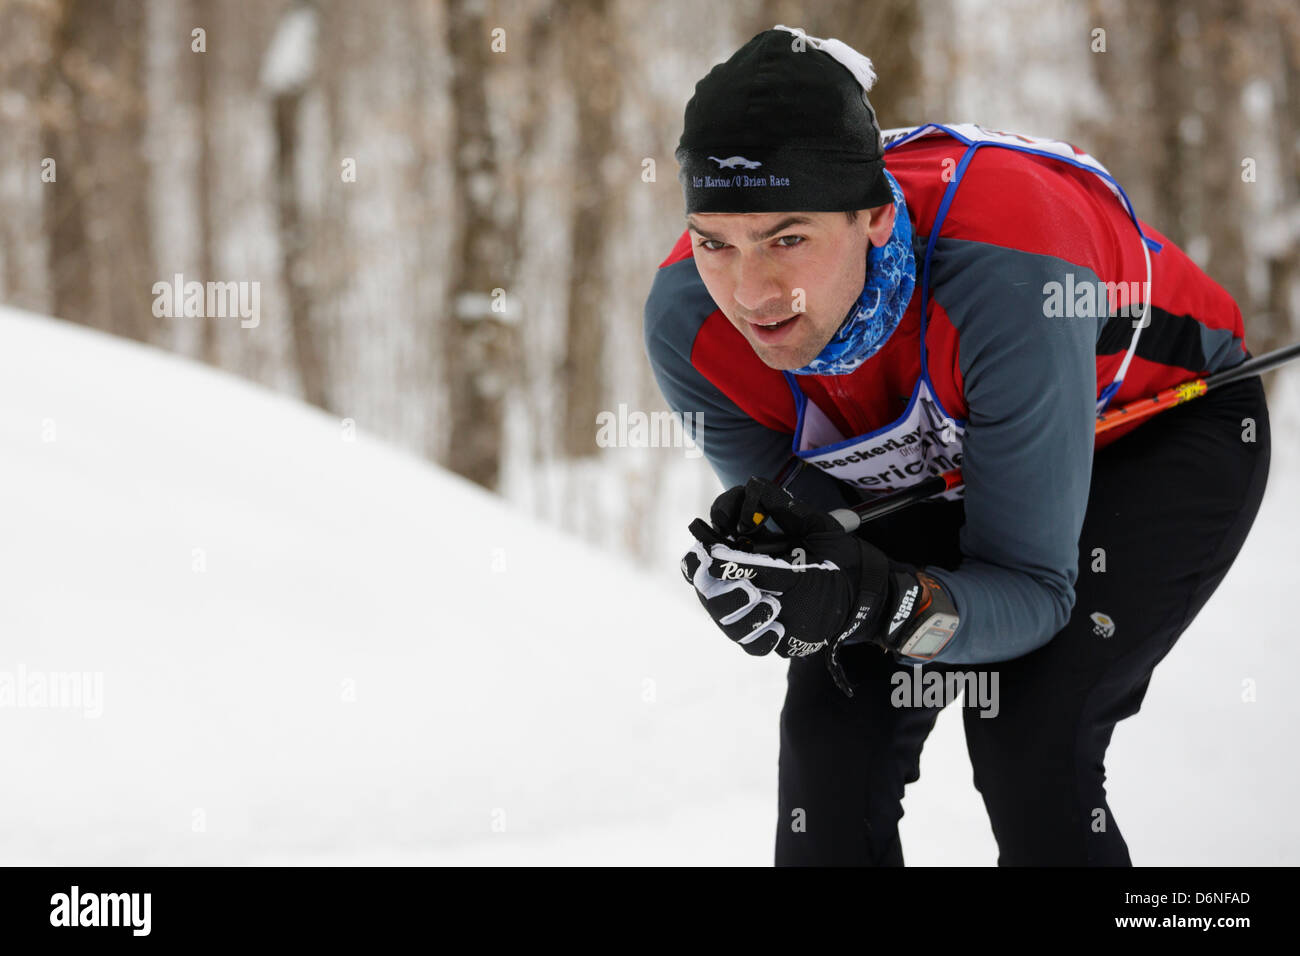 A classic style cross country skier tucks going down a hill during the American Birkebeiner in Northern Wisconsin. Stock Photo